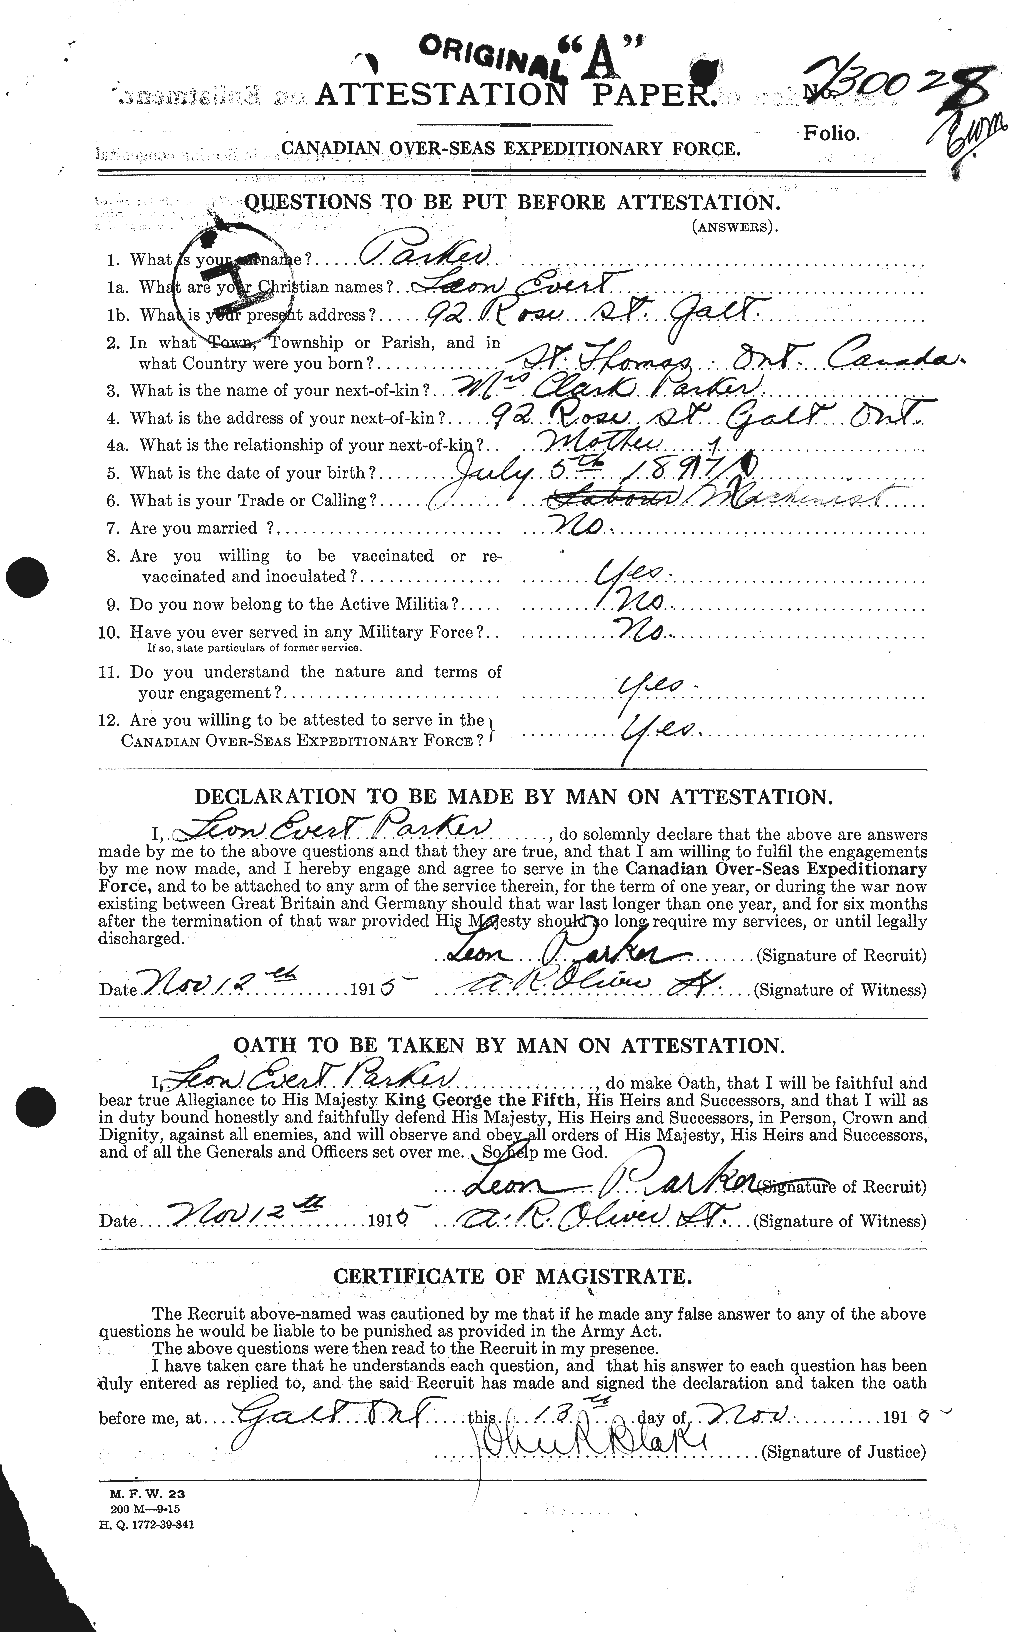 Personnel Records of the First World War - CEF 565523a